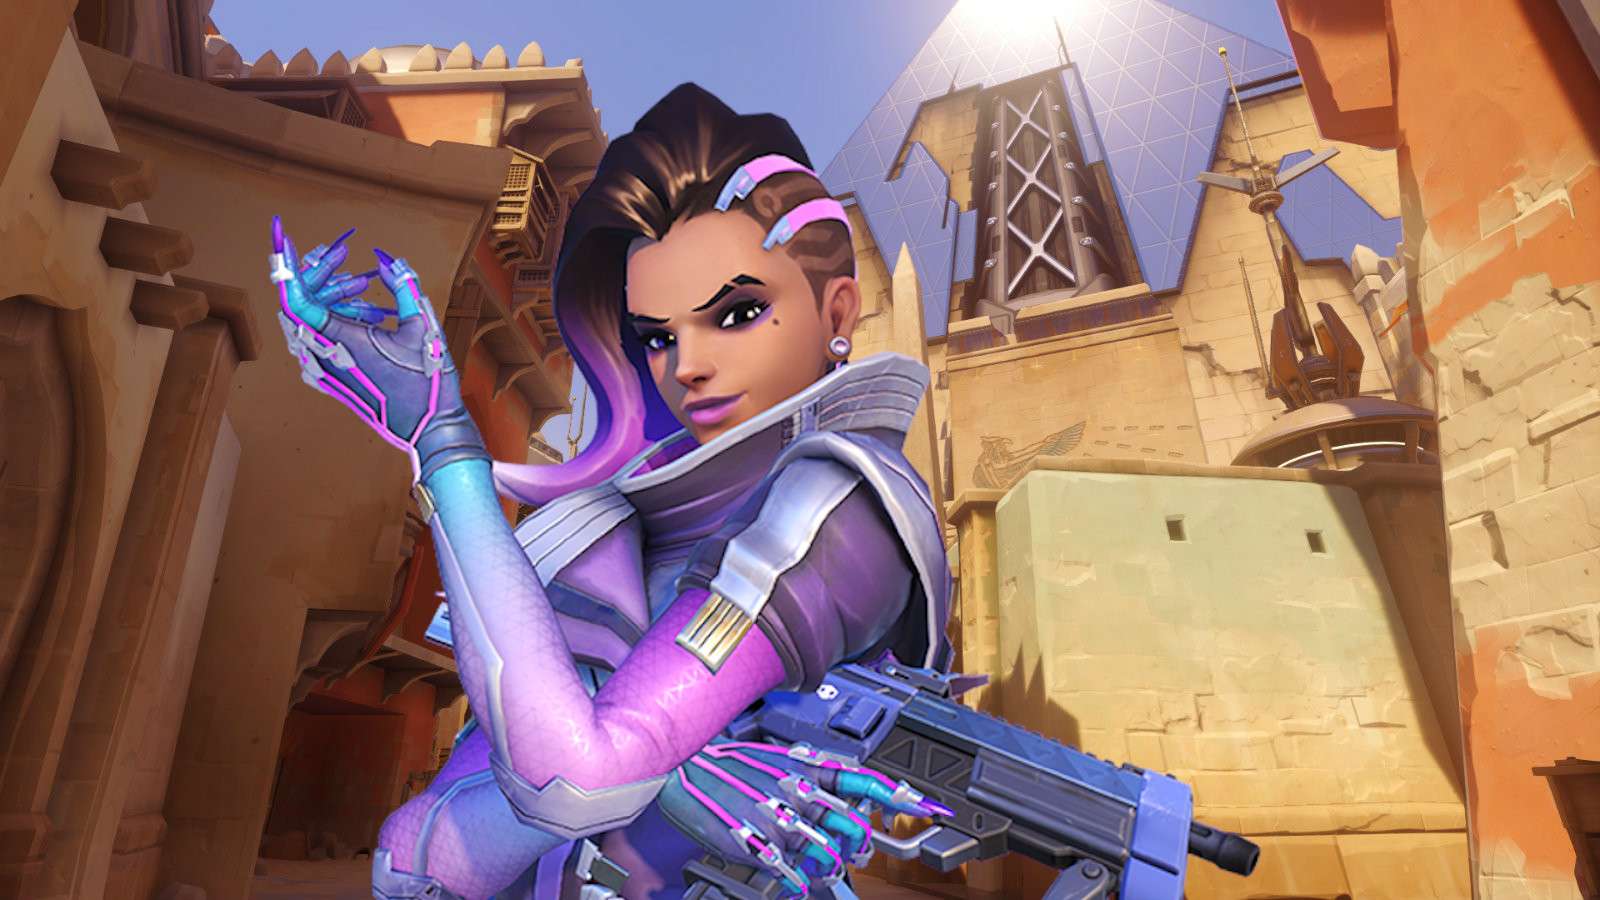 Sombra on Temple of Anubis in Overwatch